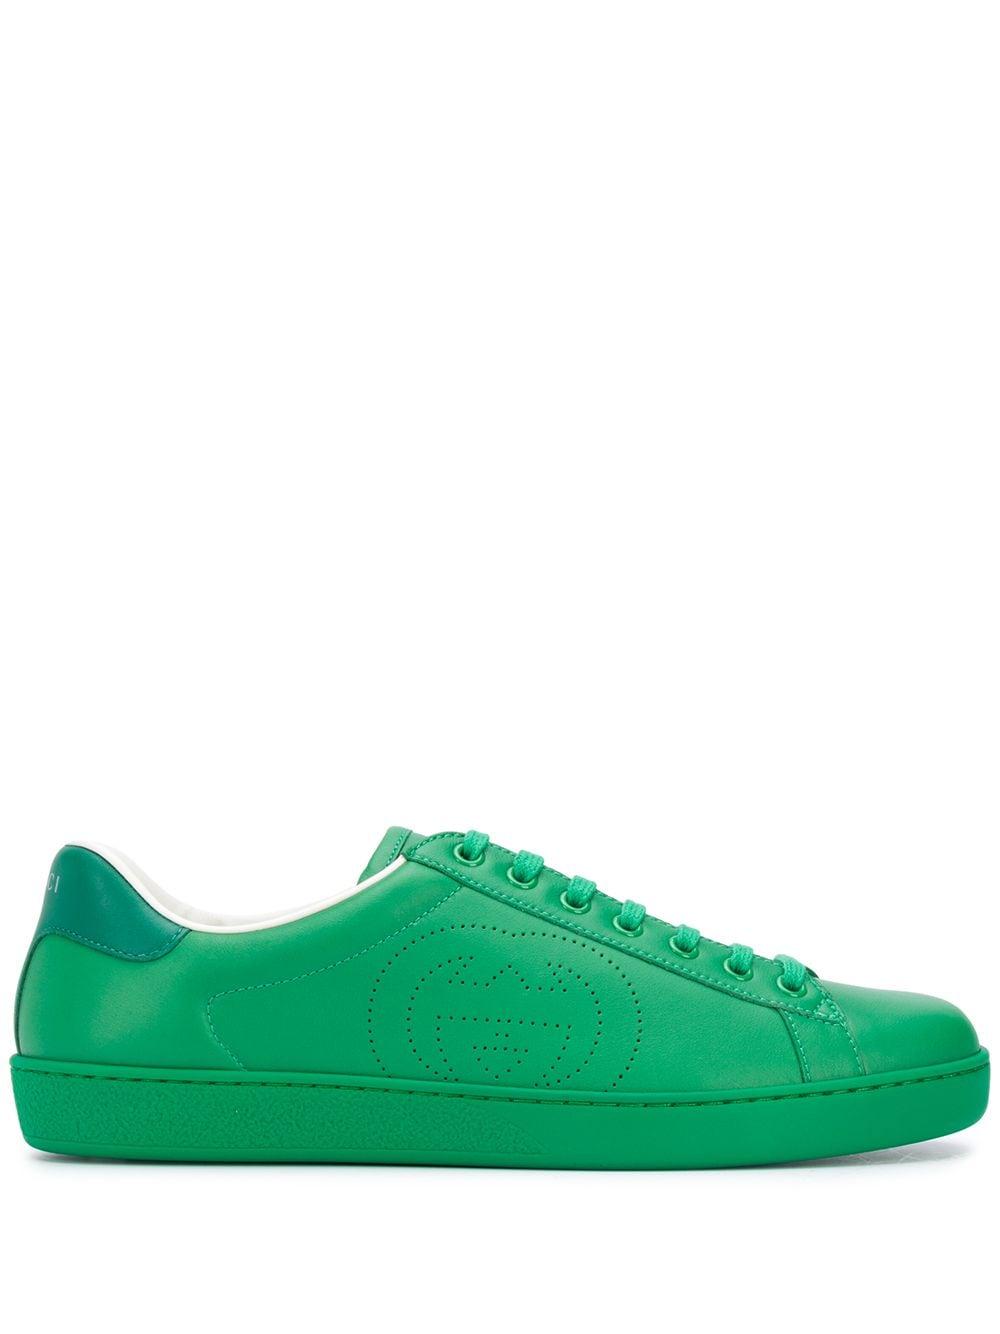 Gucci Leather Interlocking G Ace Sneakers in Green for Men - Lyst